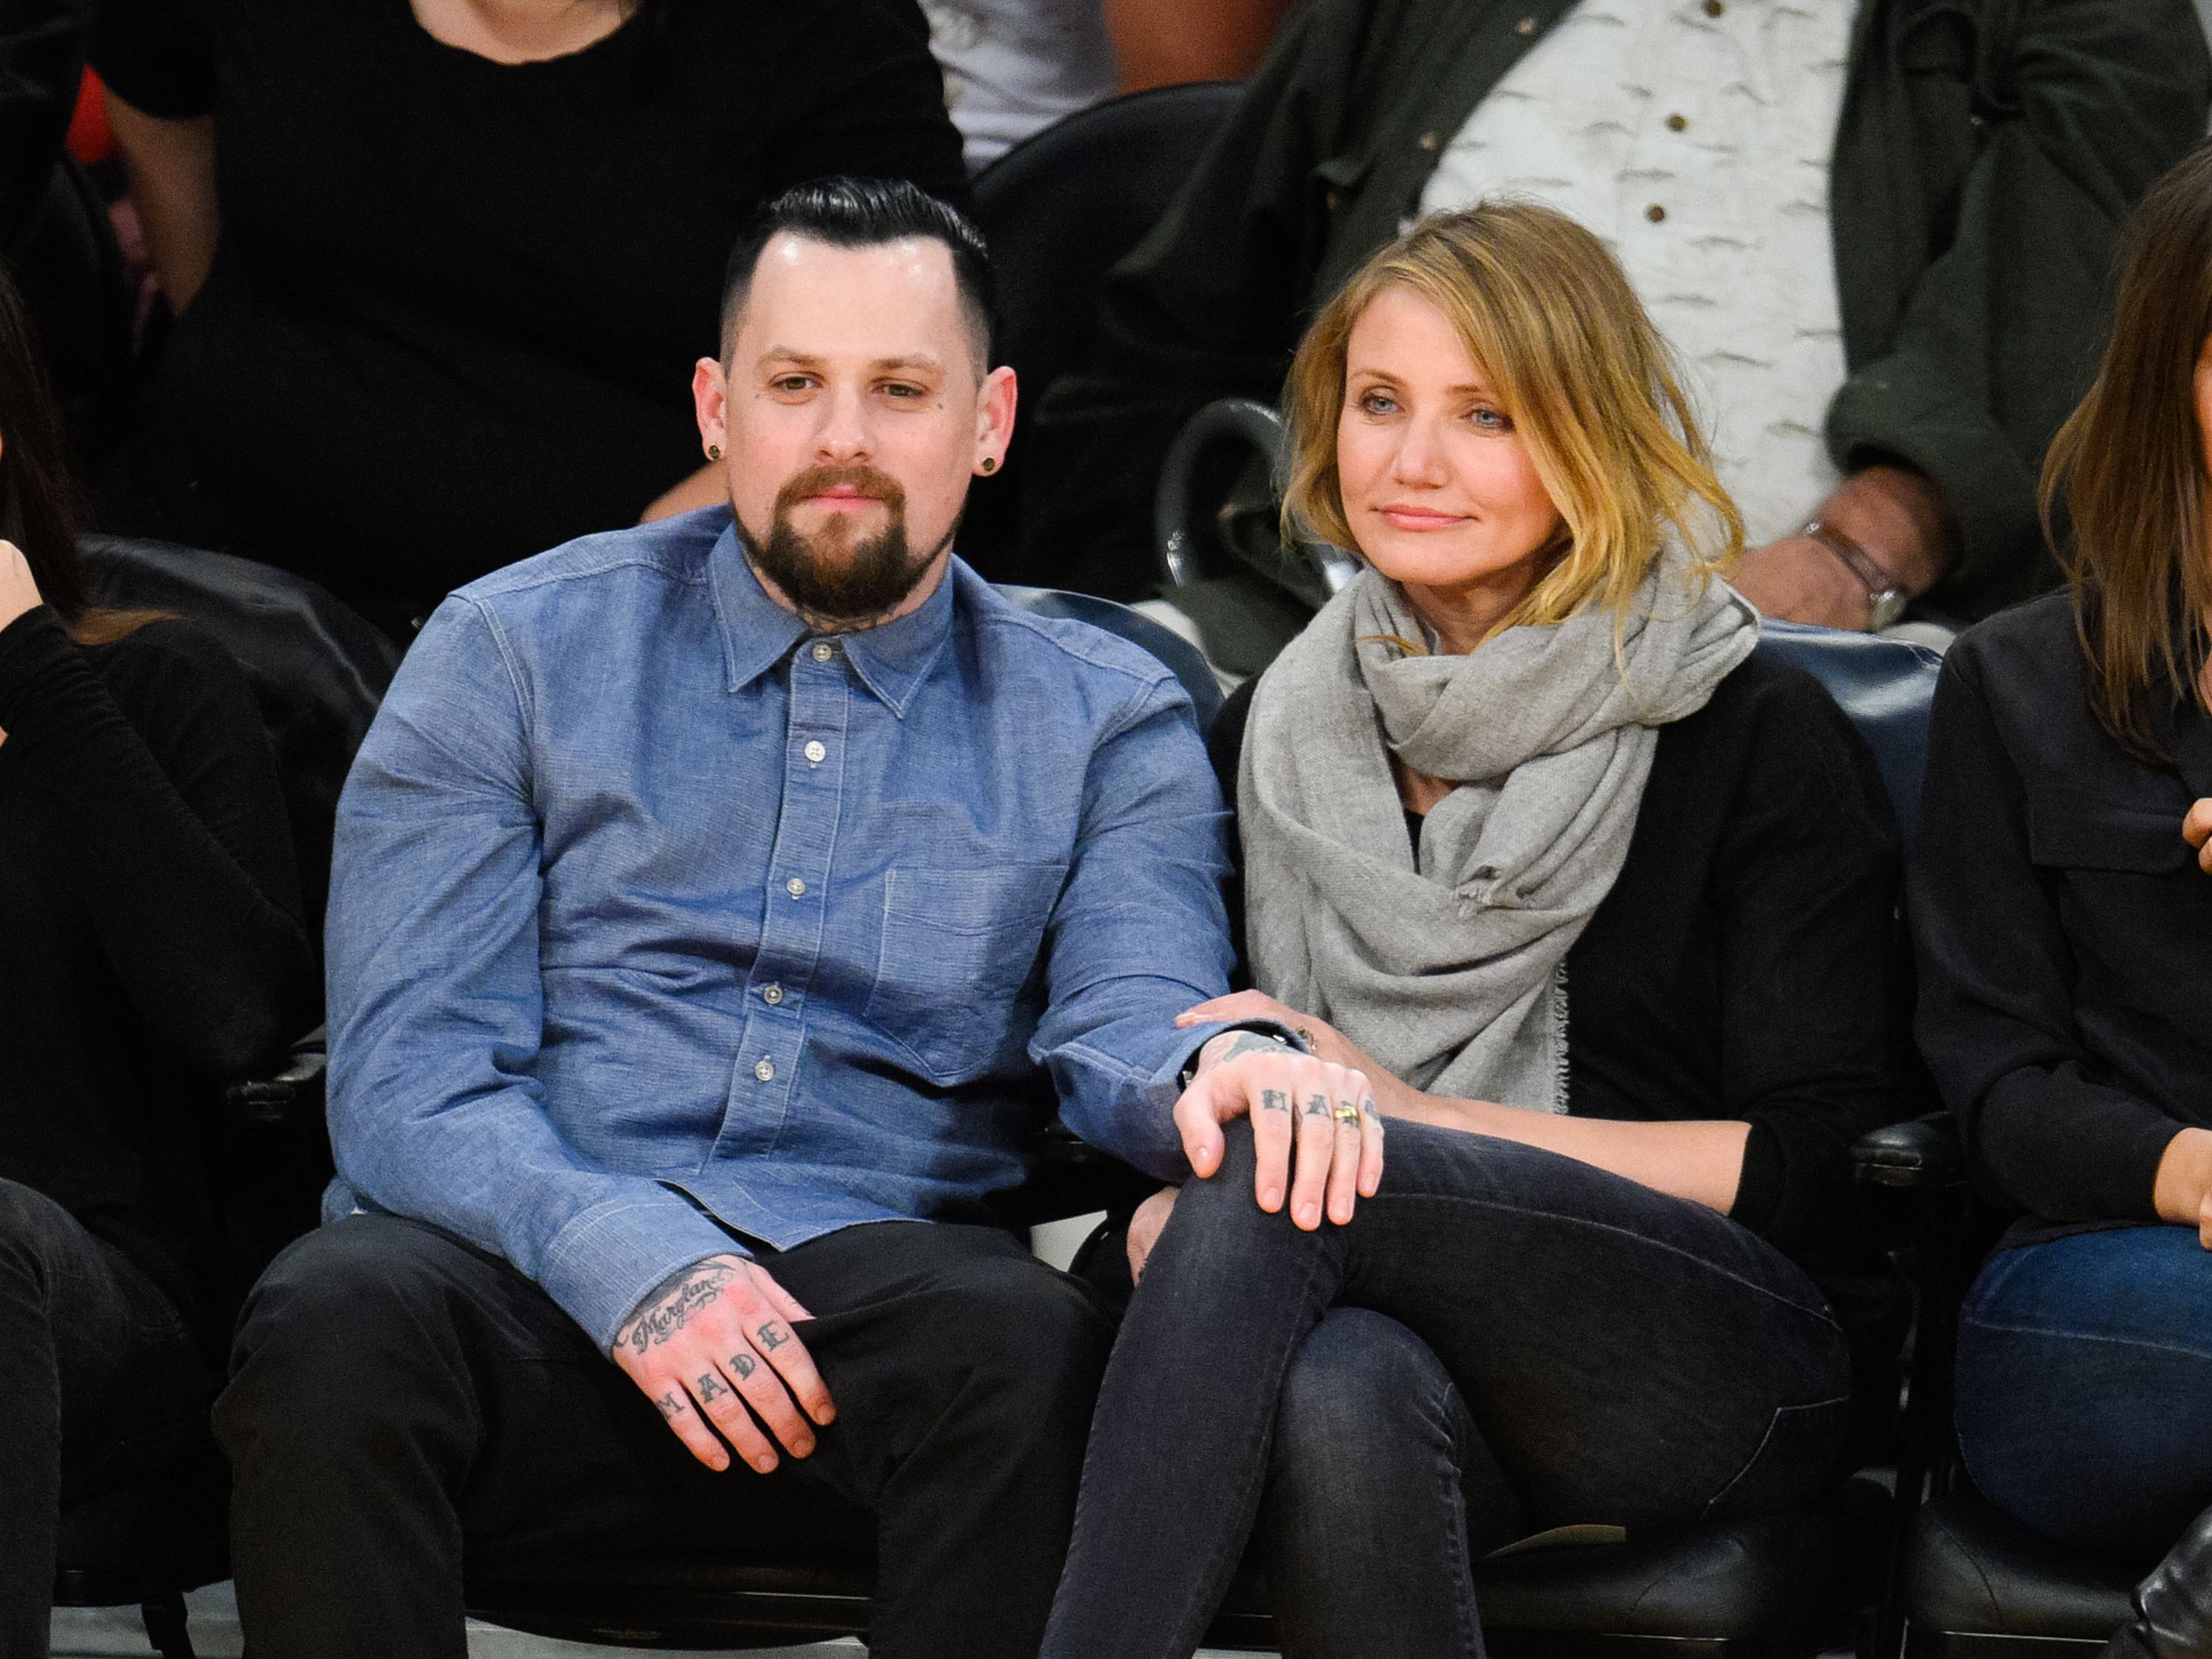 Benji Madden and Cameron Diaz at a basketball game on January 27, 2015, in Los Angeles, California. | Source: Noel Vasquez/GC Images/Getty Images